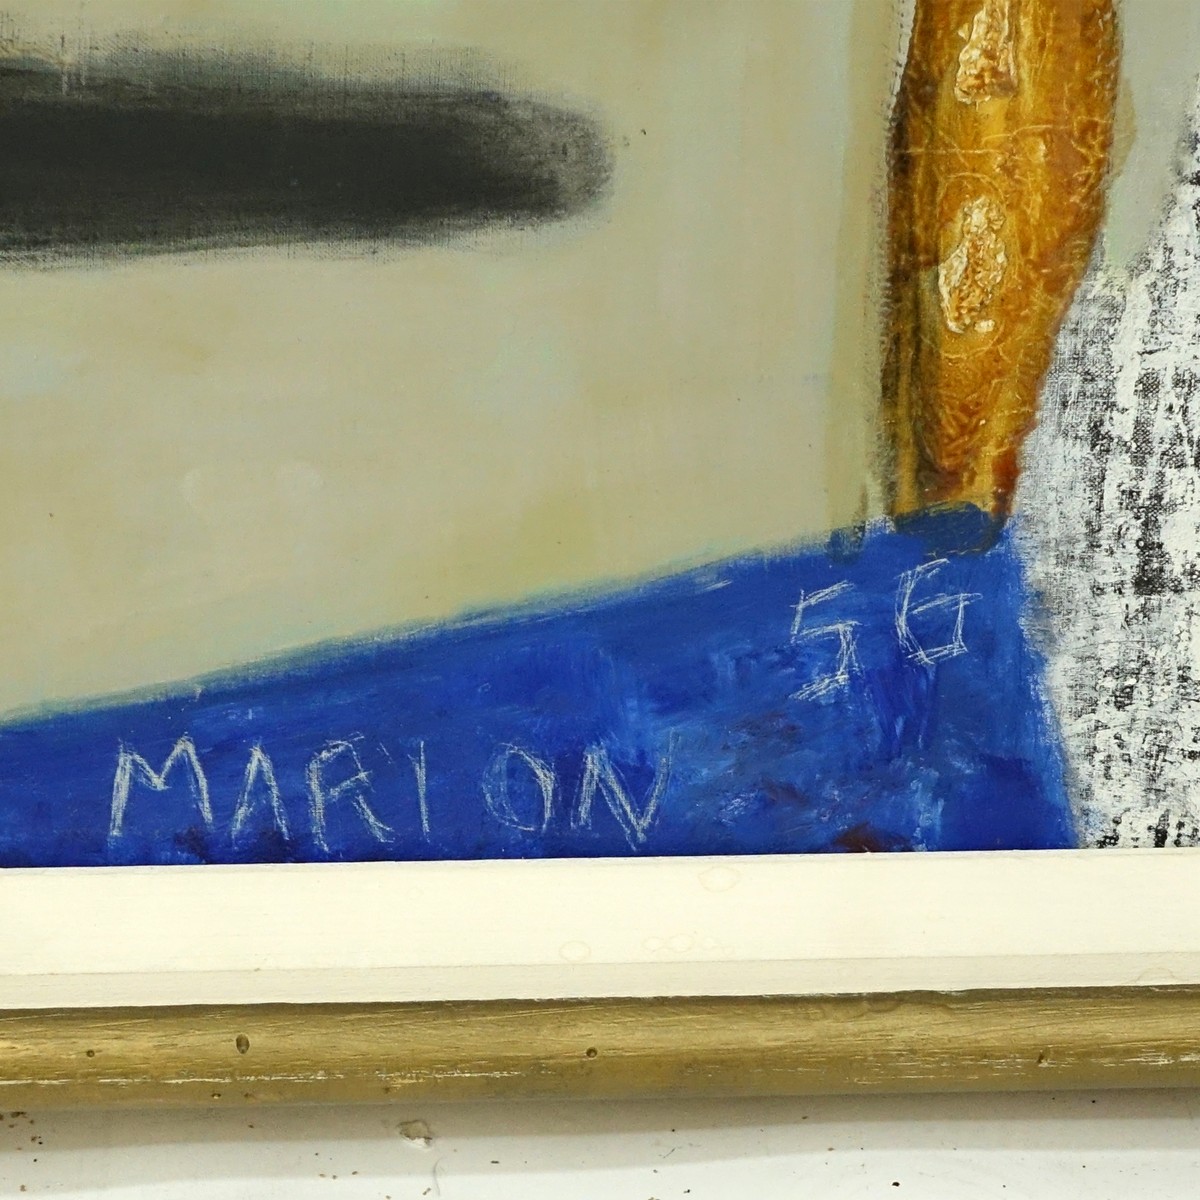 Marion, French (20th C) Oil on Canvas, Nature Morte A L'Helice, Signed and Dated 1956 Lower Center. Inscribed on obverse side.